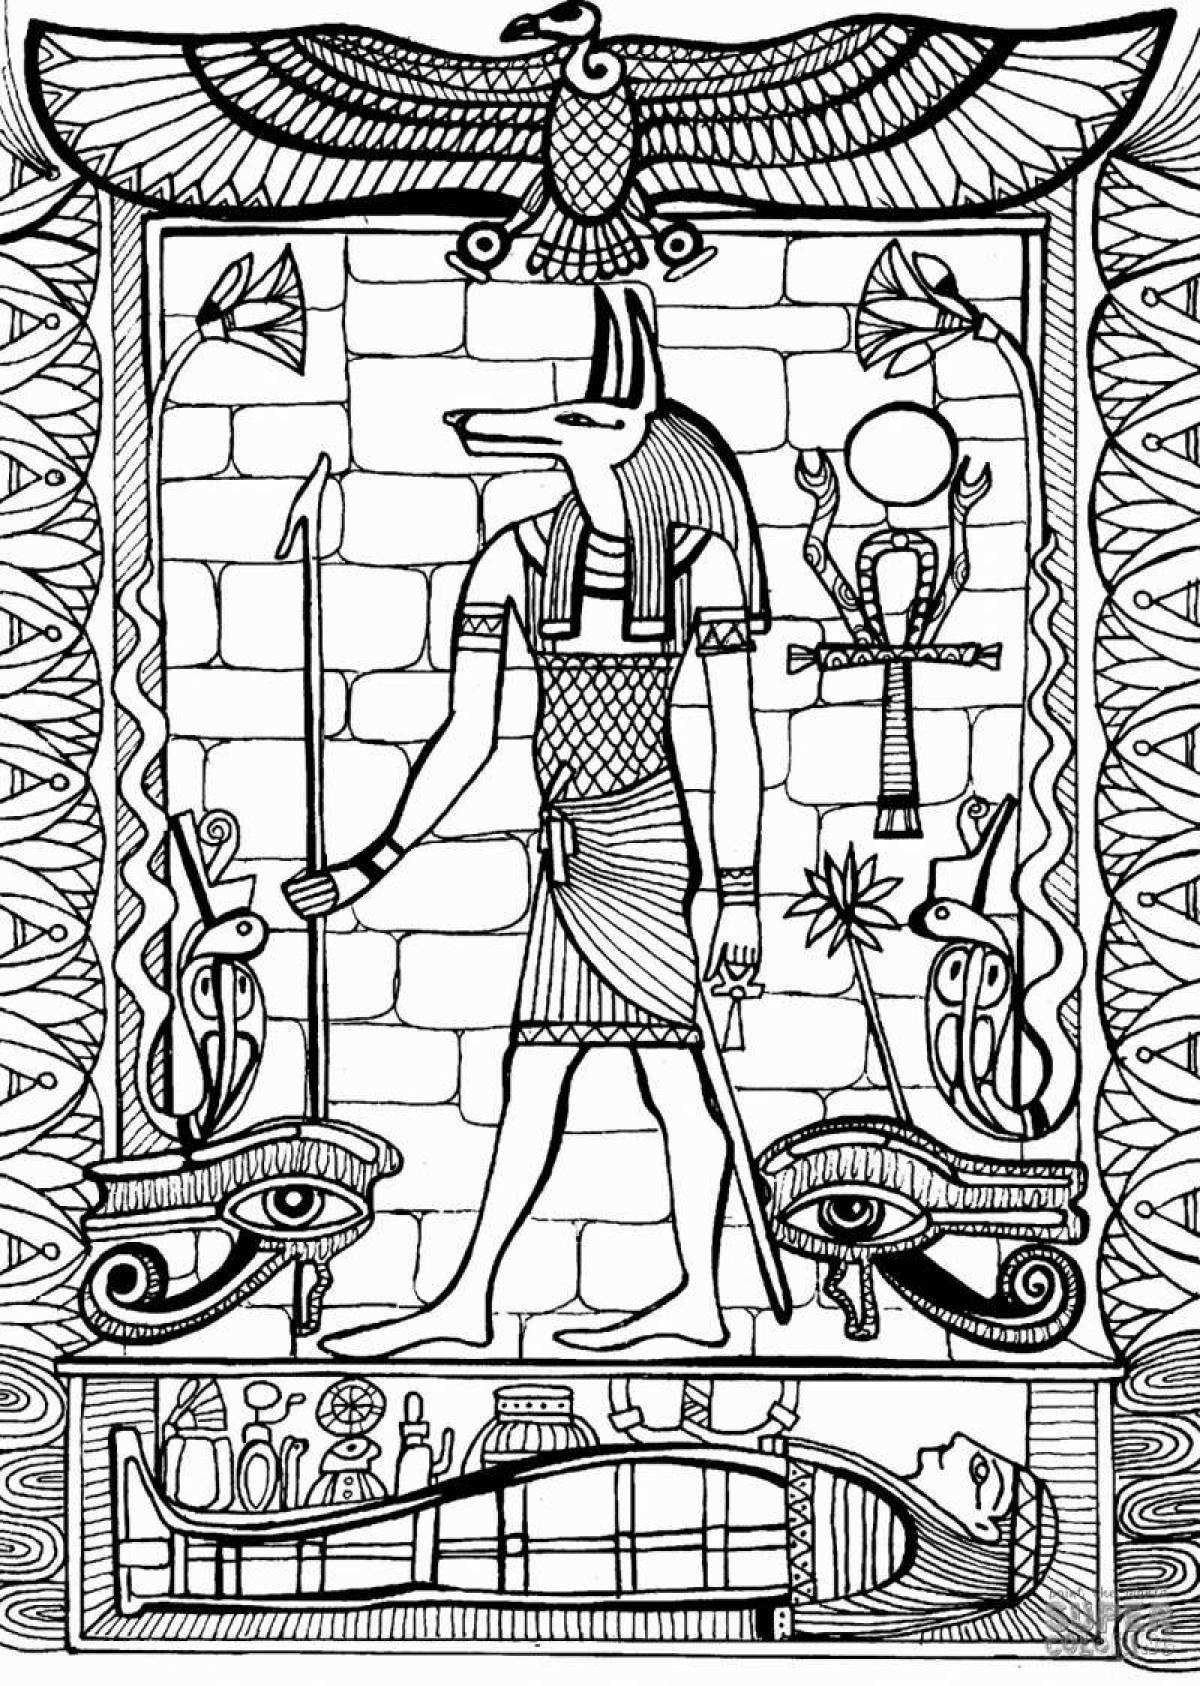 Exalted god anubis coloring page